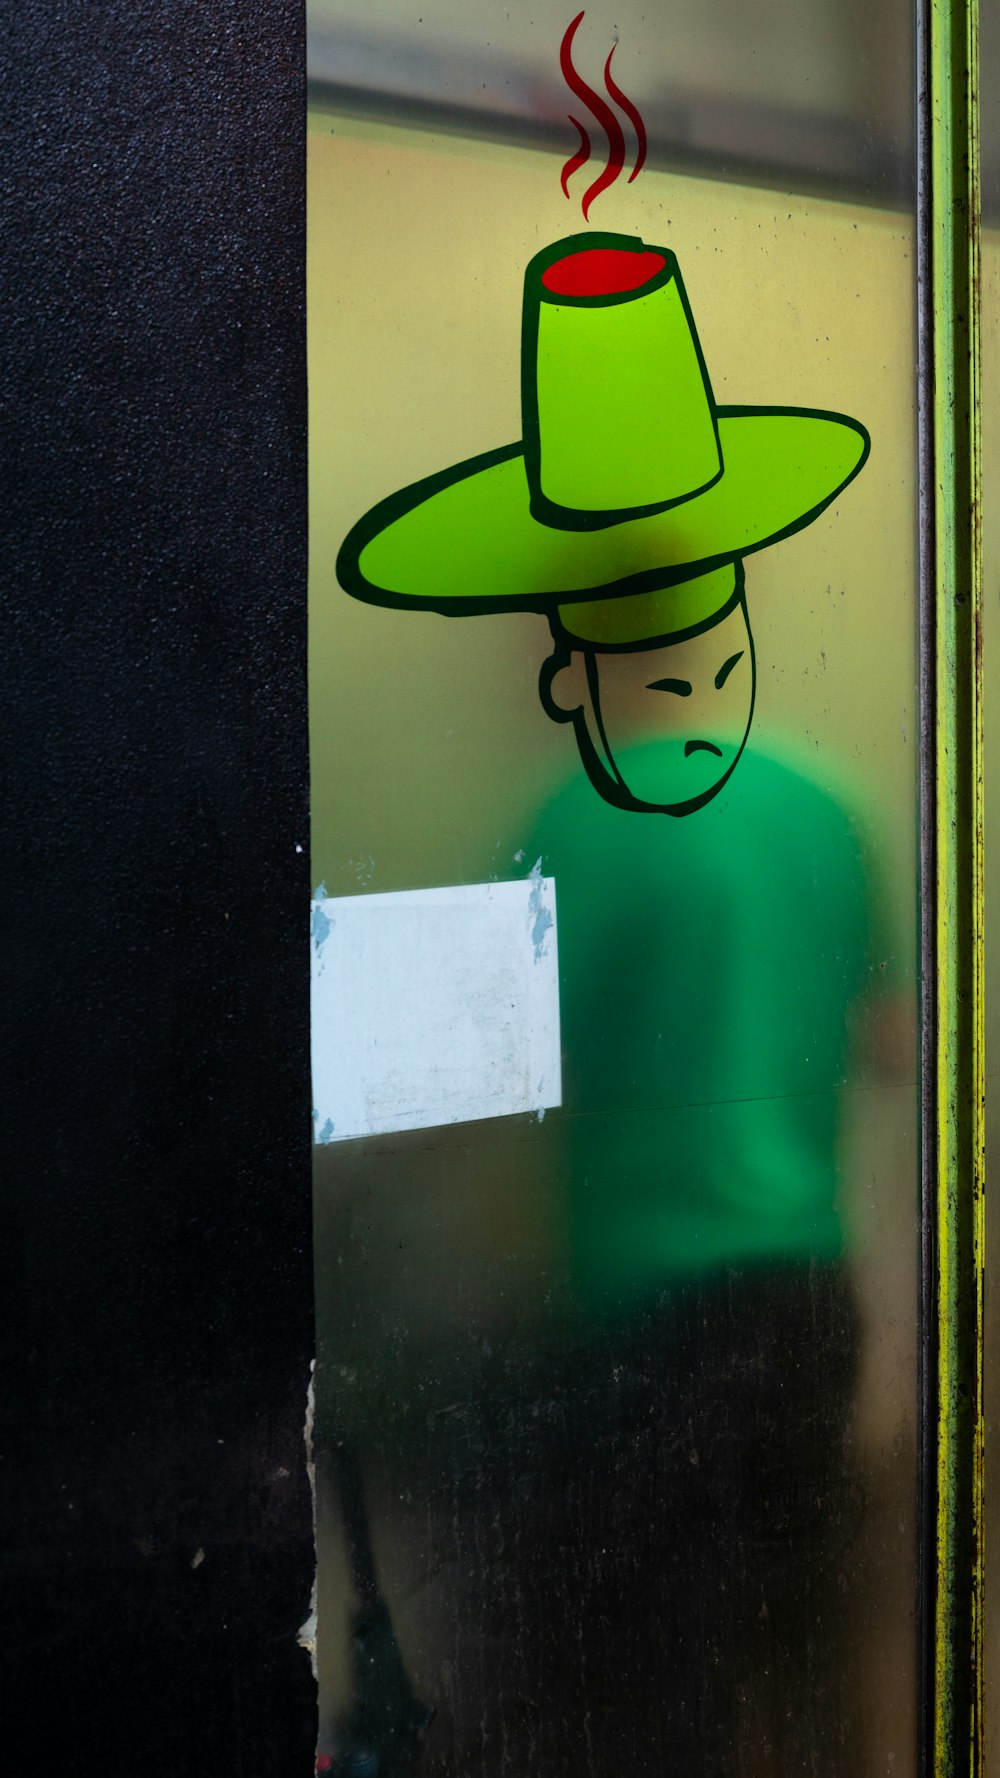 a picture of a man wearing a green hat